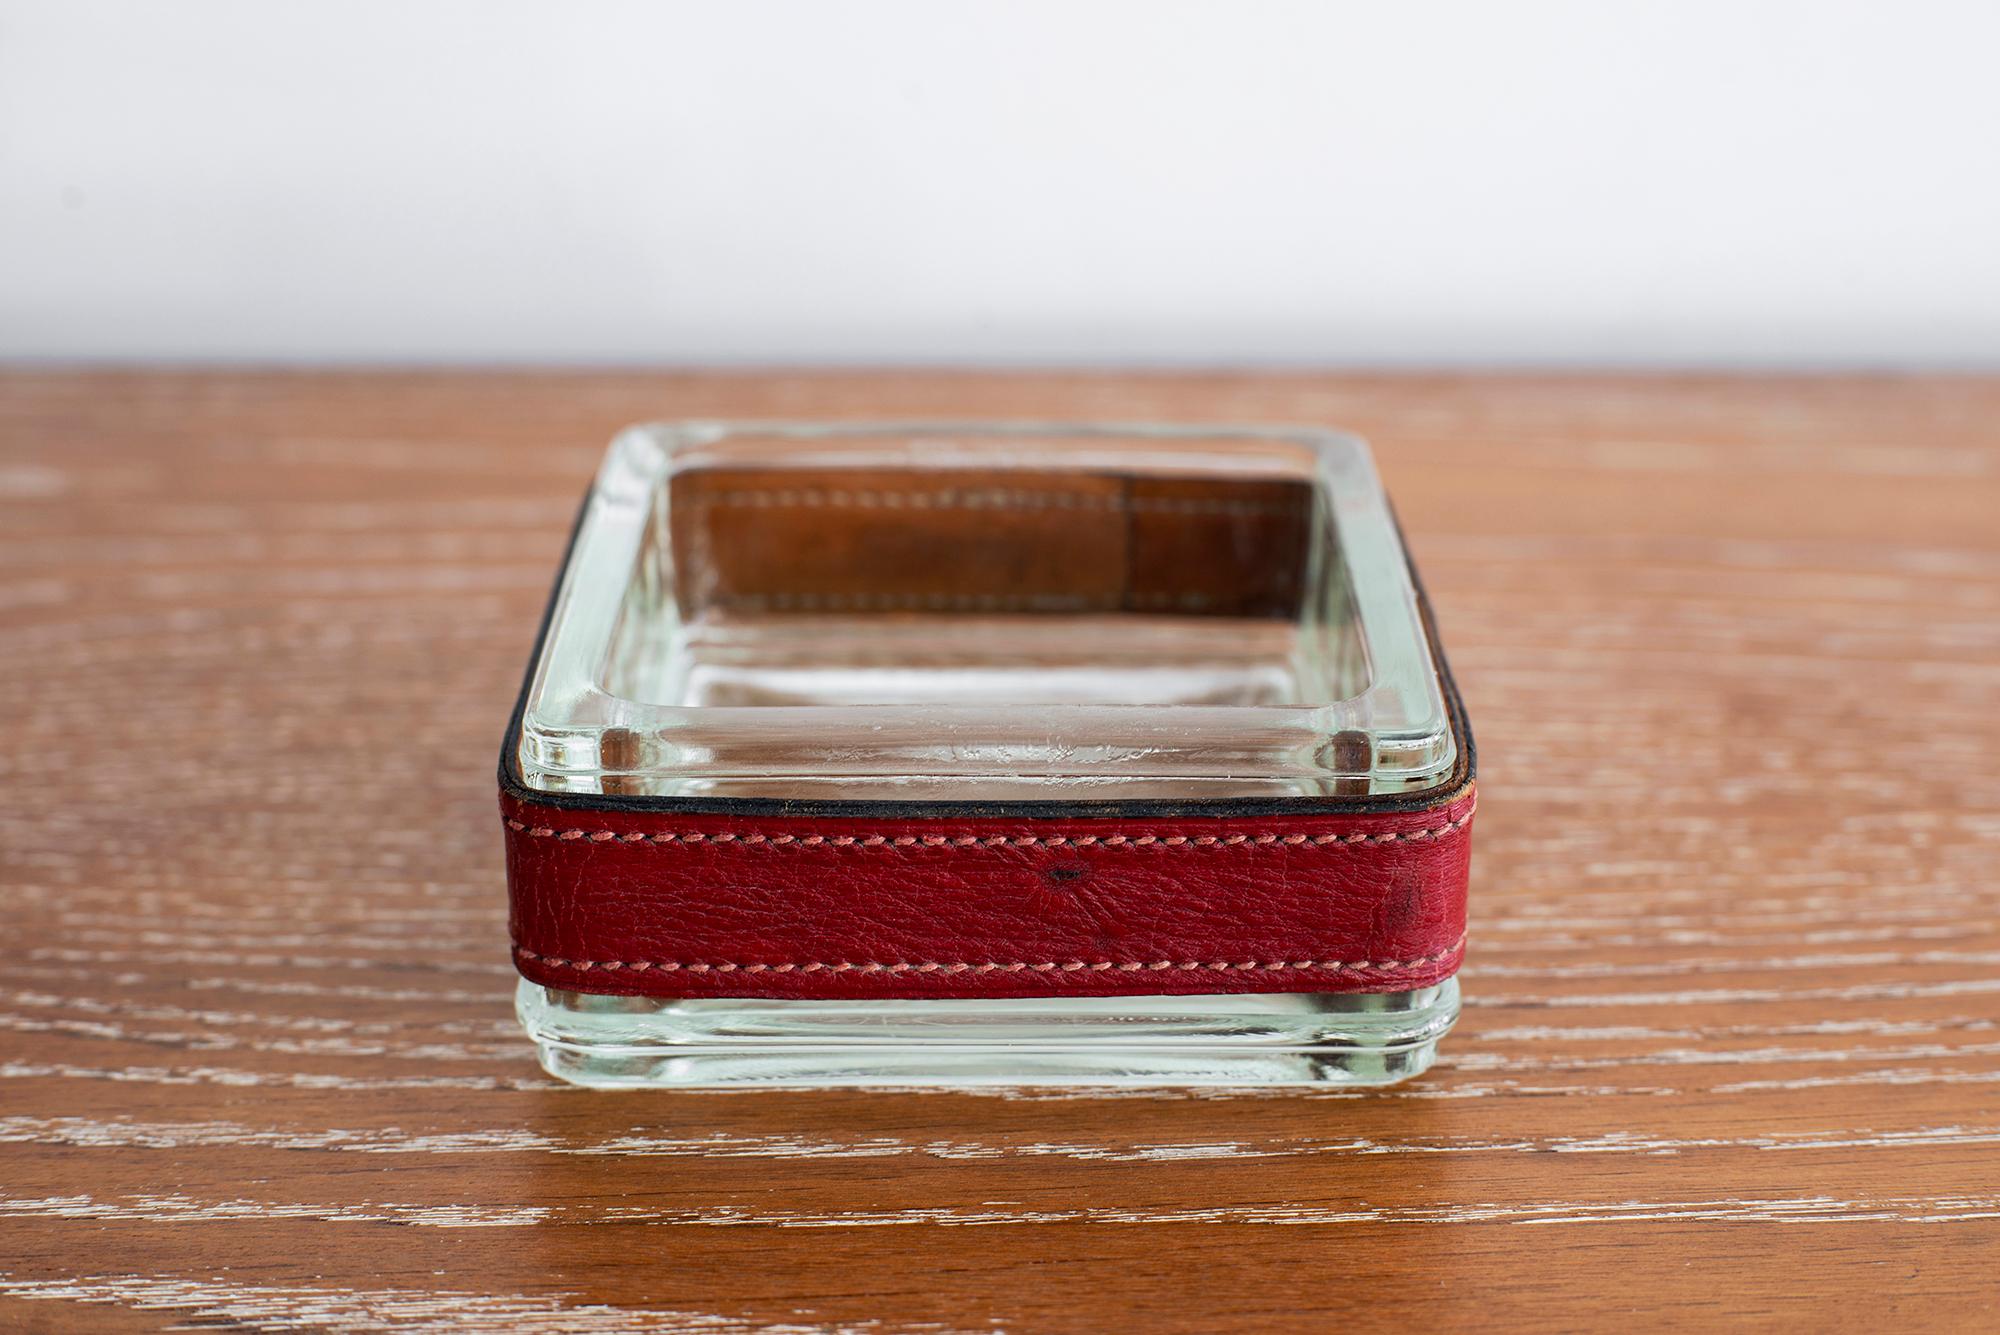 Thick square glass ashtray wrapped in red leather with white contrast stitch detailing.
Great gift idea!